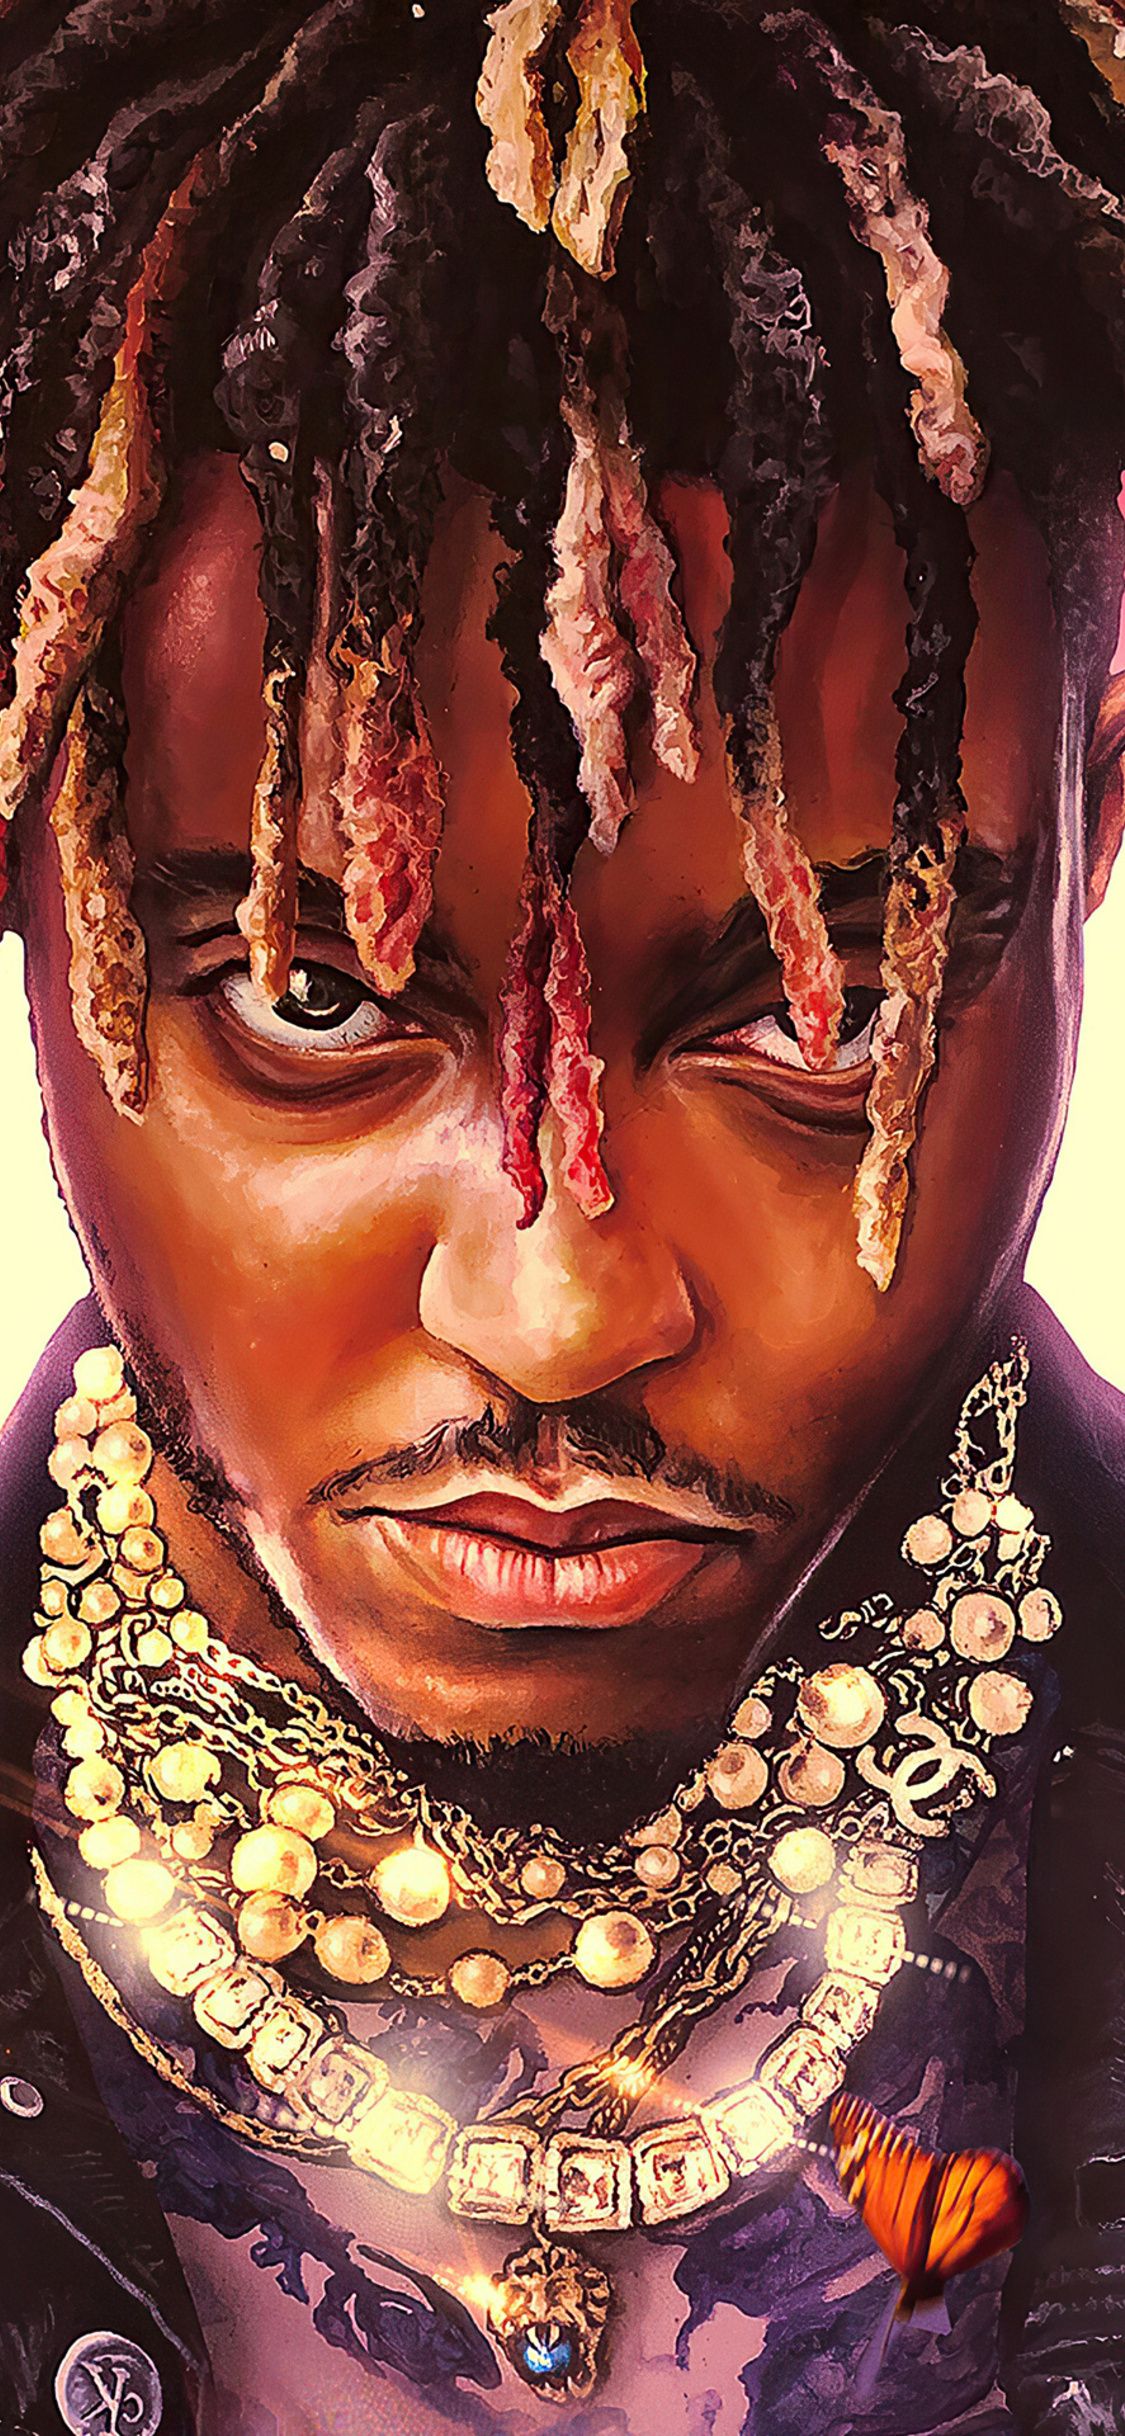 Juice Wrld 2020 iPhone XS, iPhone iPhone X HD 4k Wallpaper, Image, Background, Photo and Picture